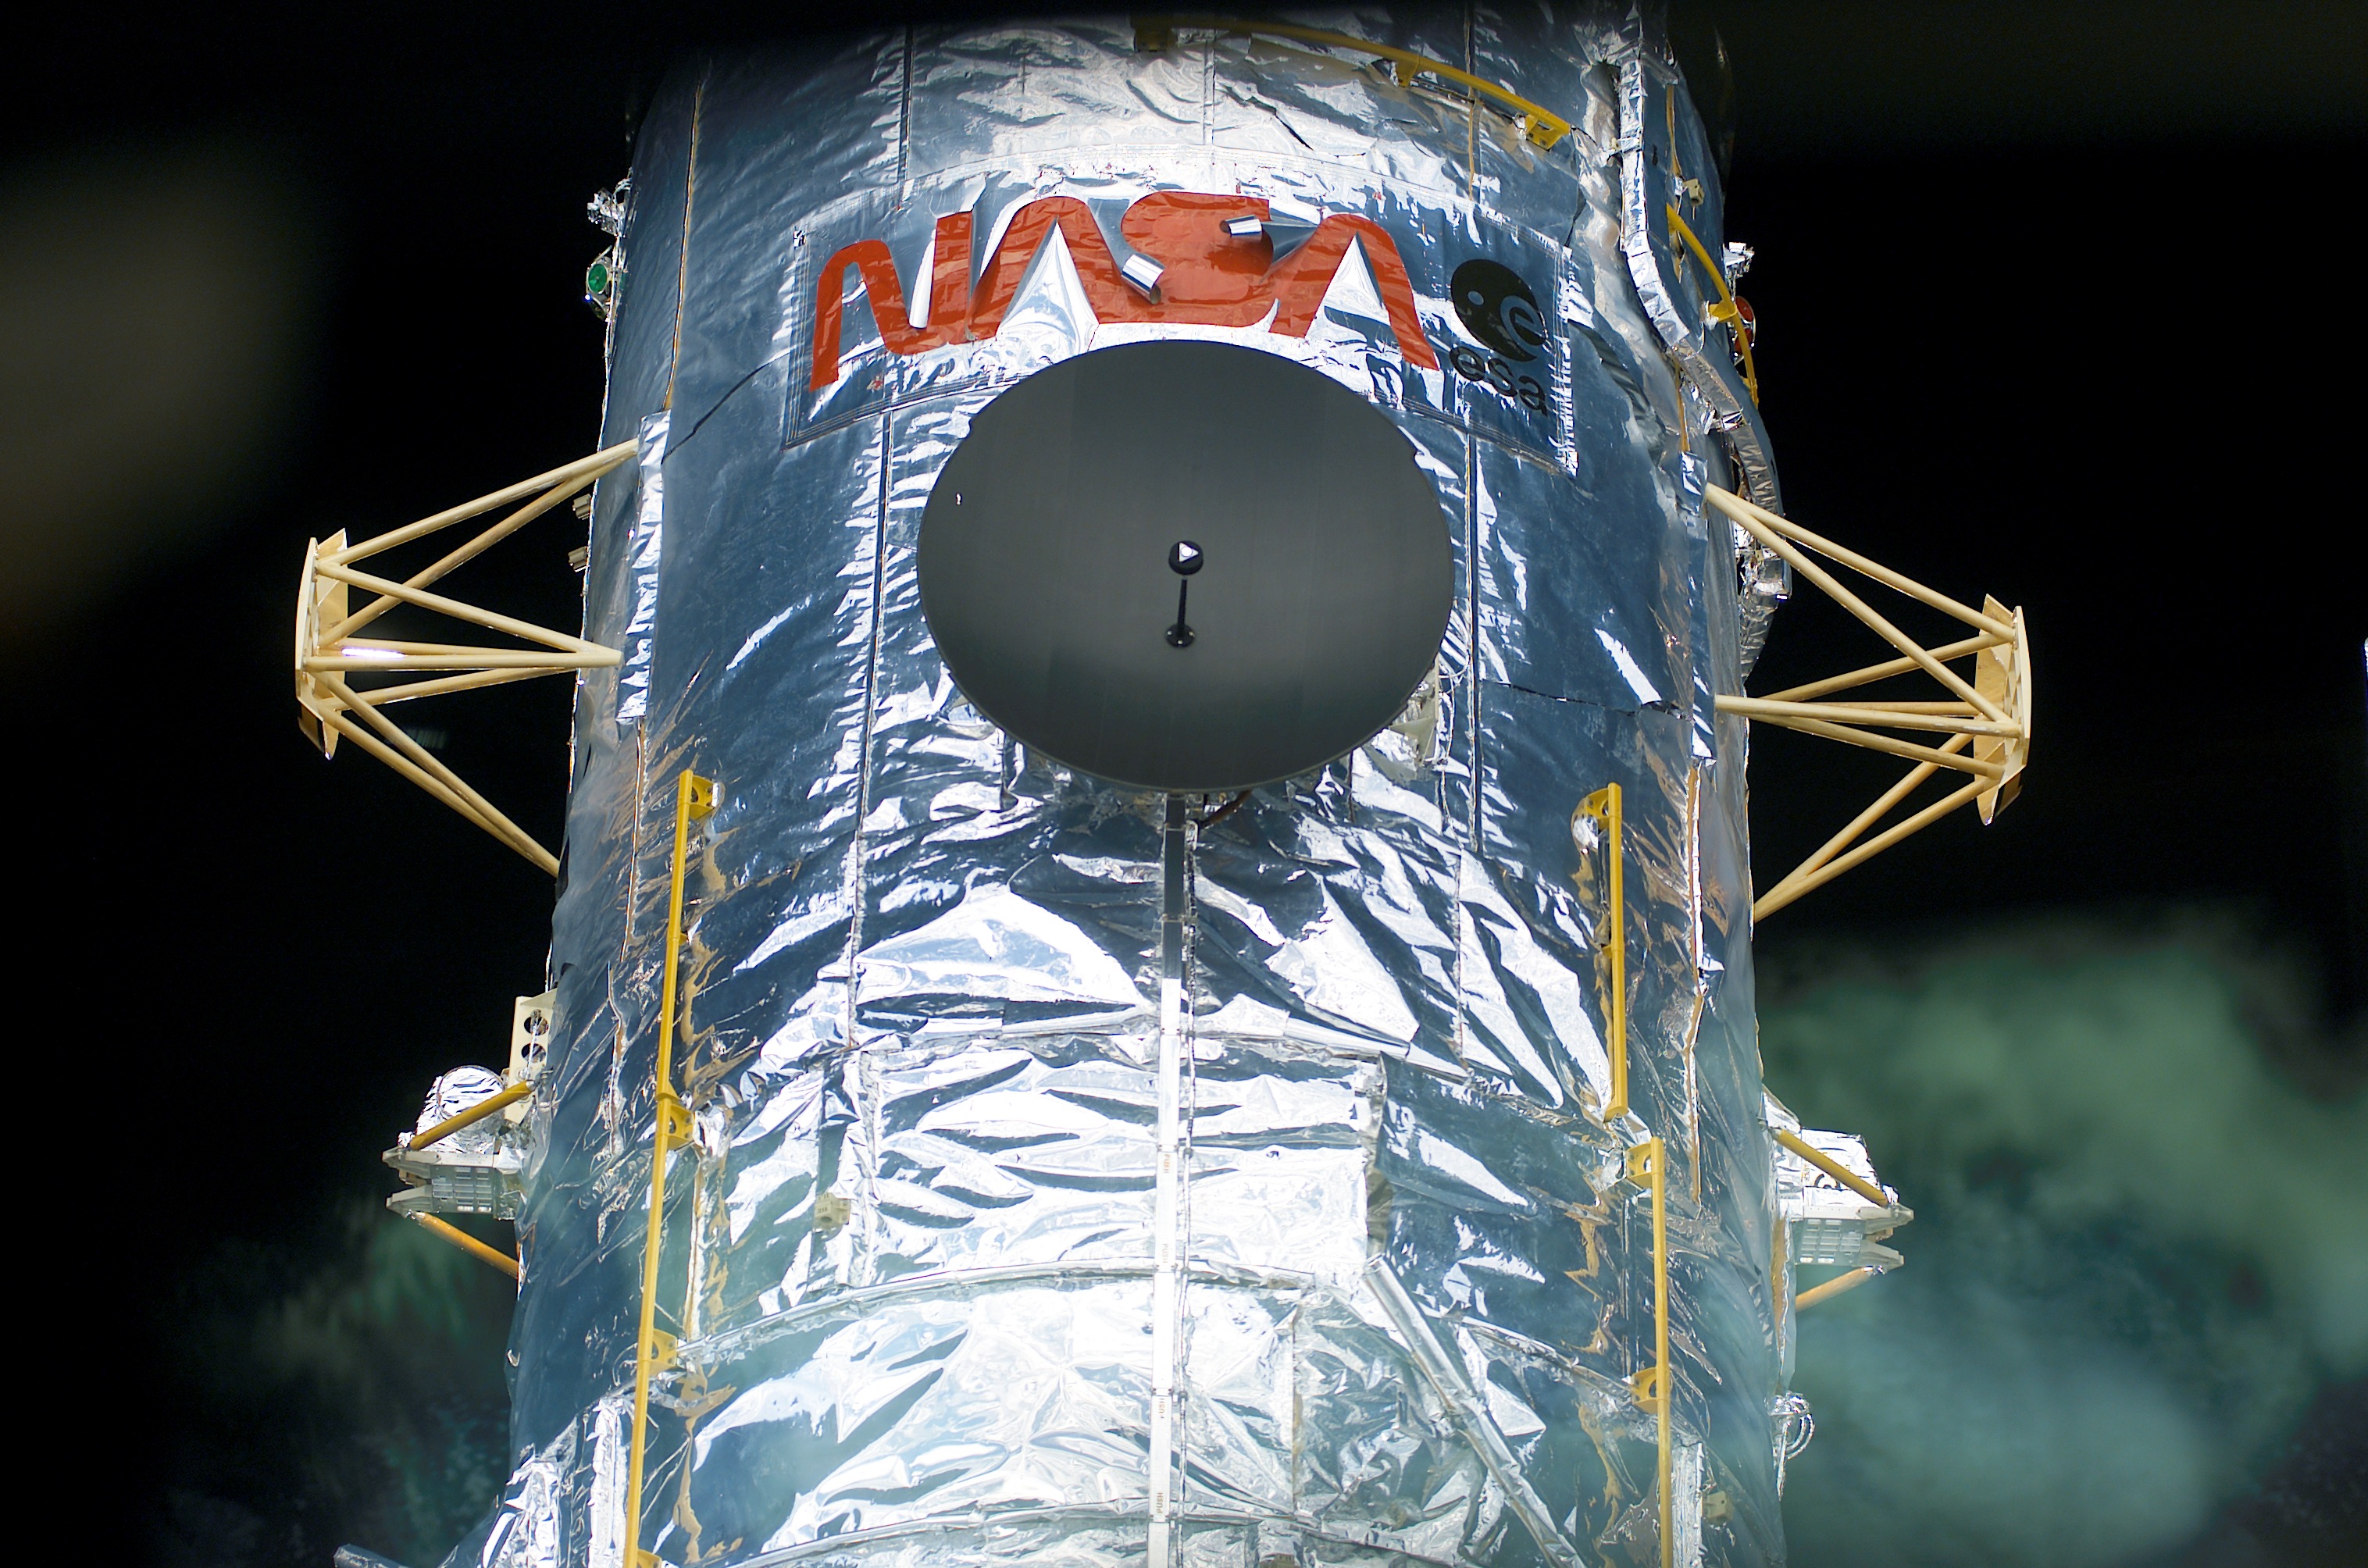 The top portion of the Hubble Space Telescope is seen in this image, with the red NASA worm logo on it, against black space.